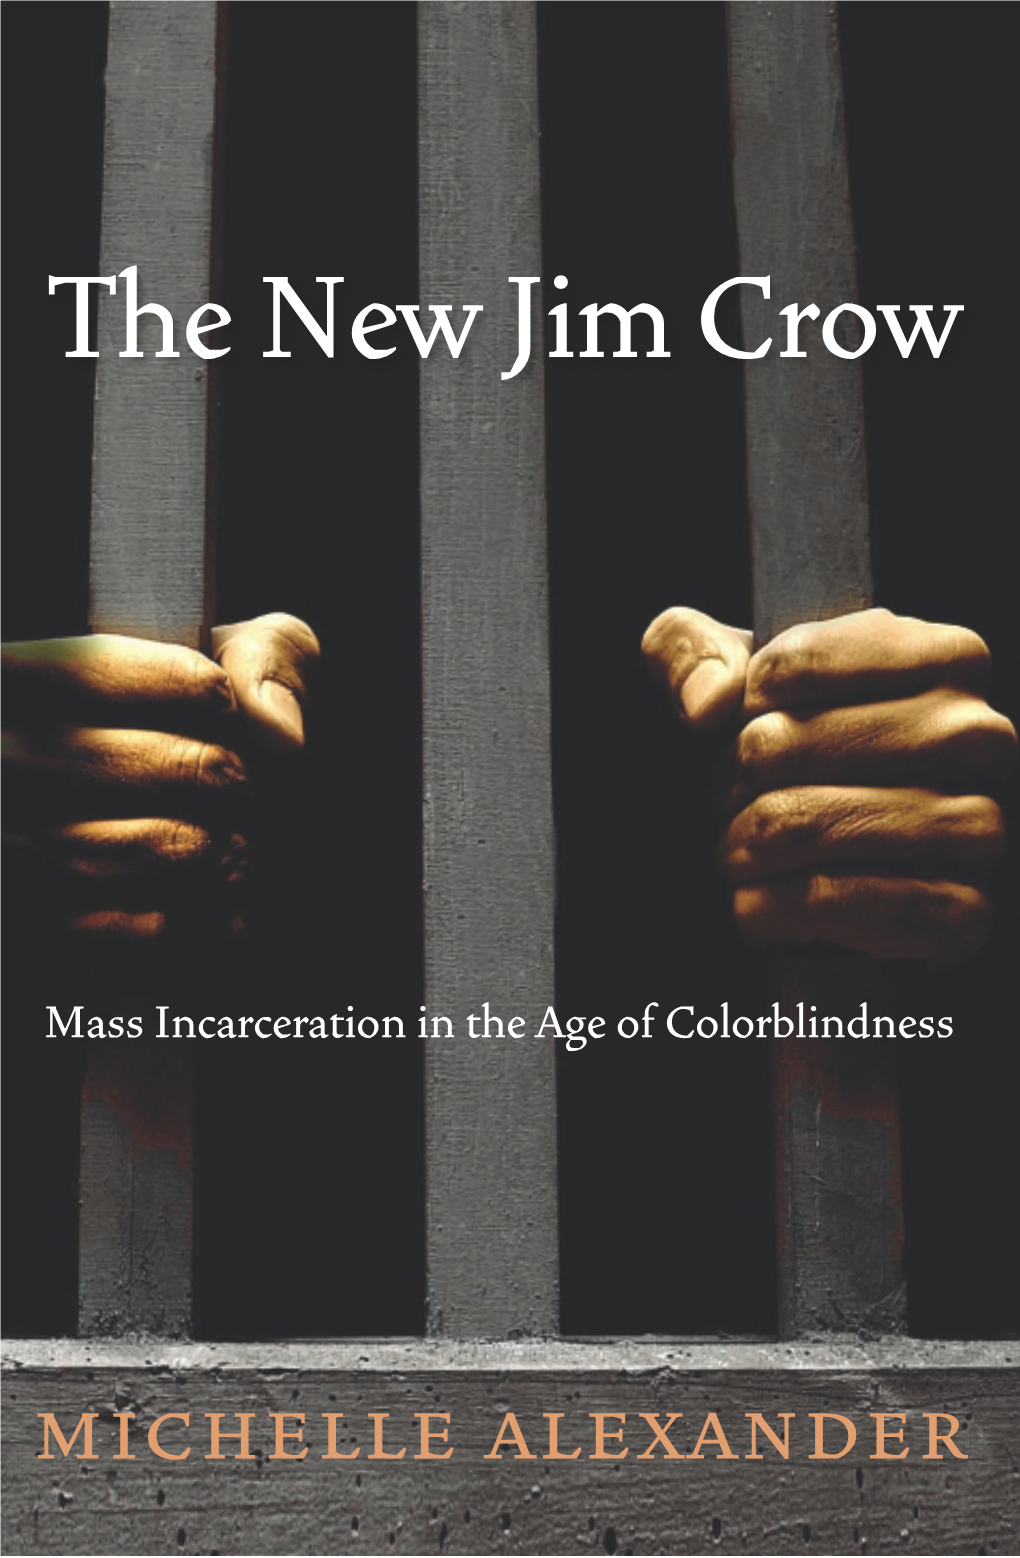 The New Jim Crow : Mass Incarceration in the Age of Colorblindness / Michelle Alexander